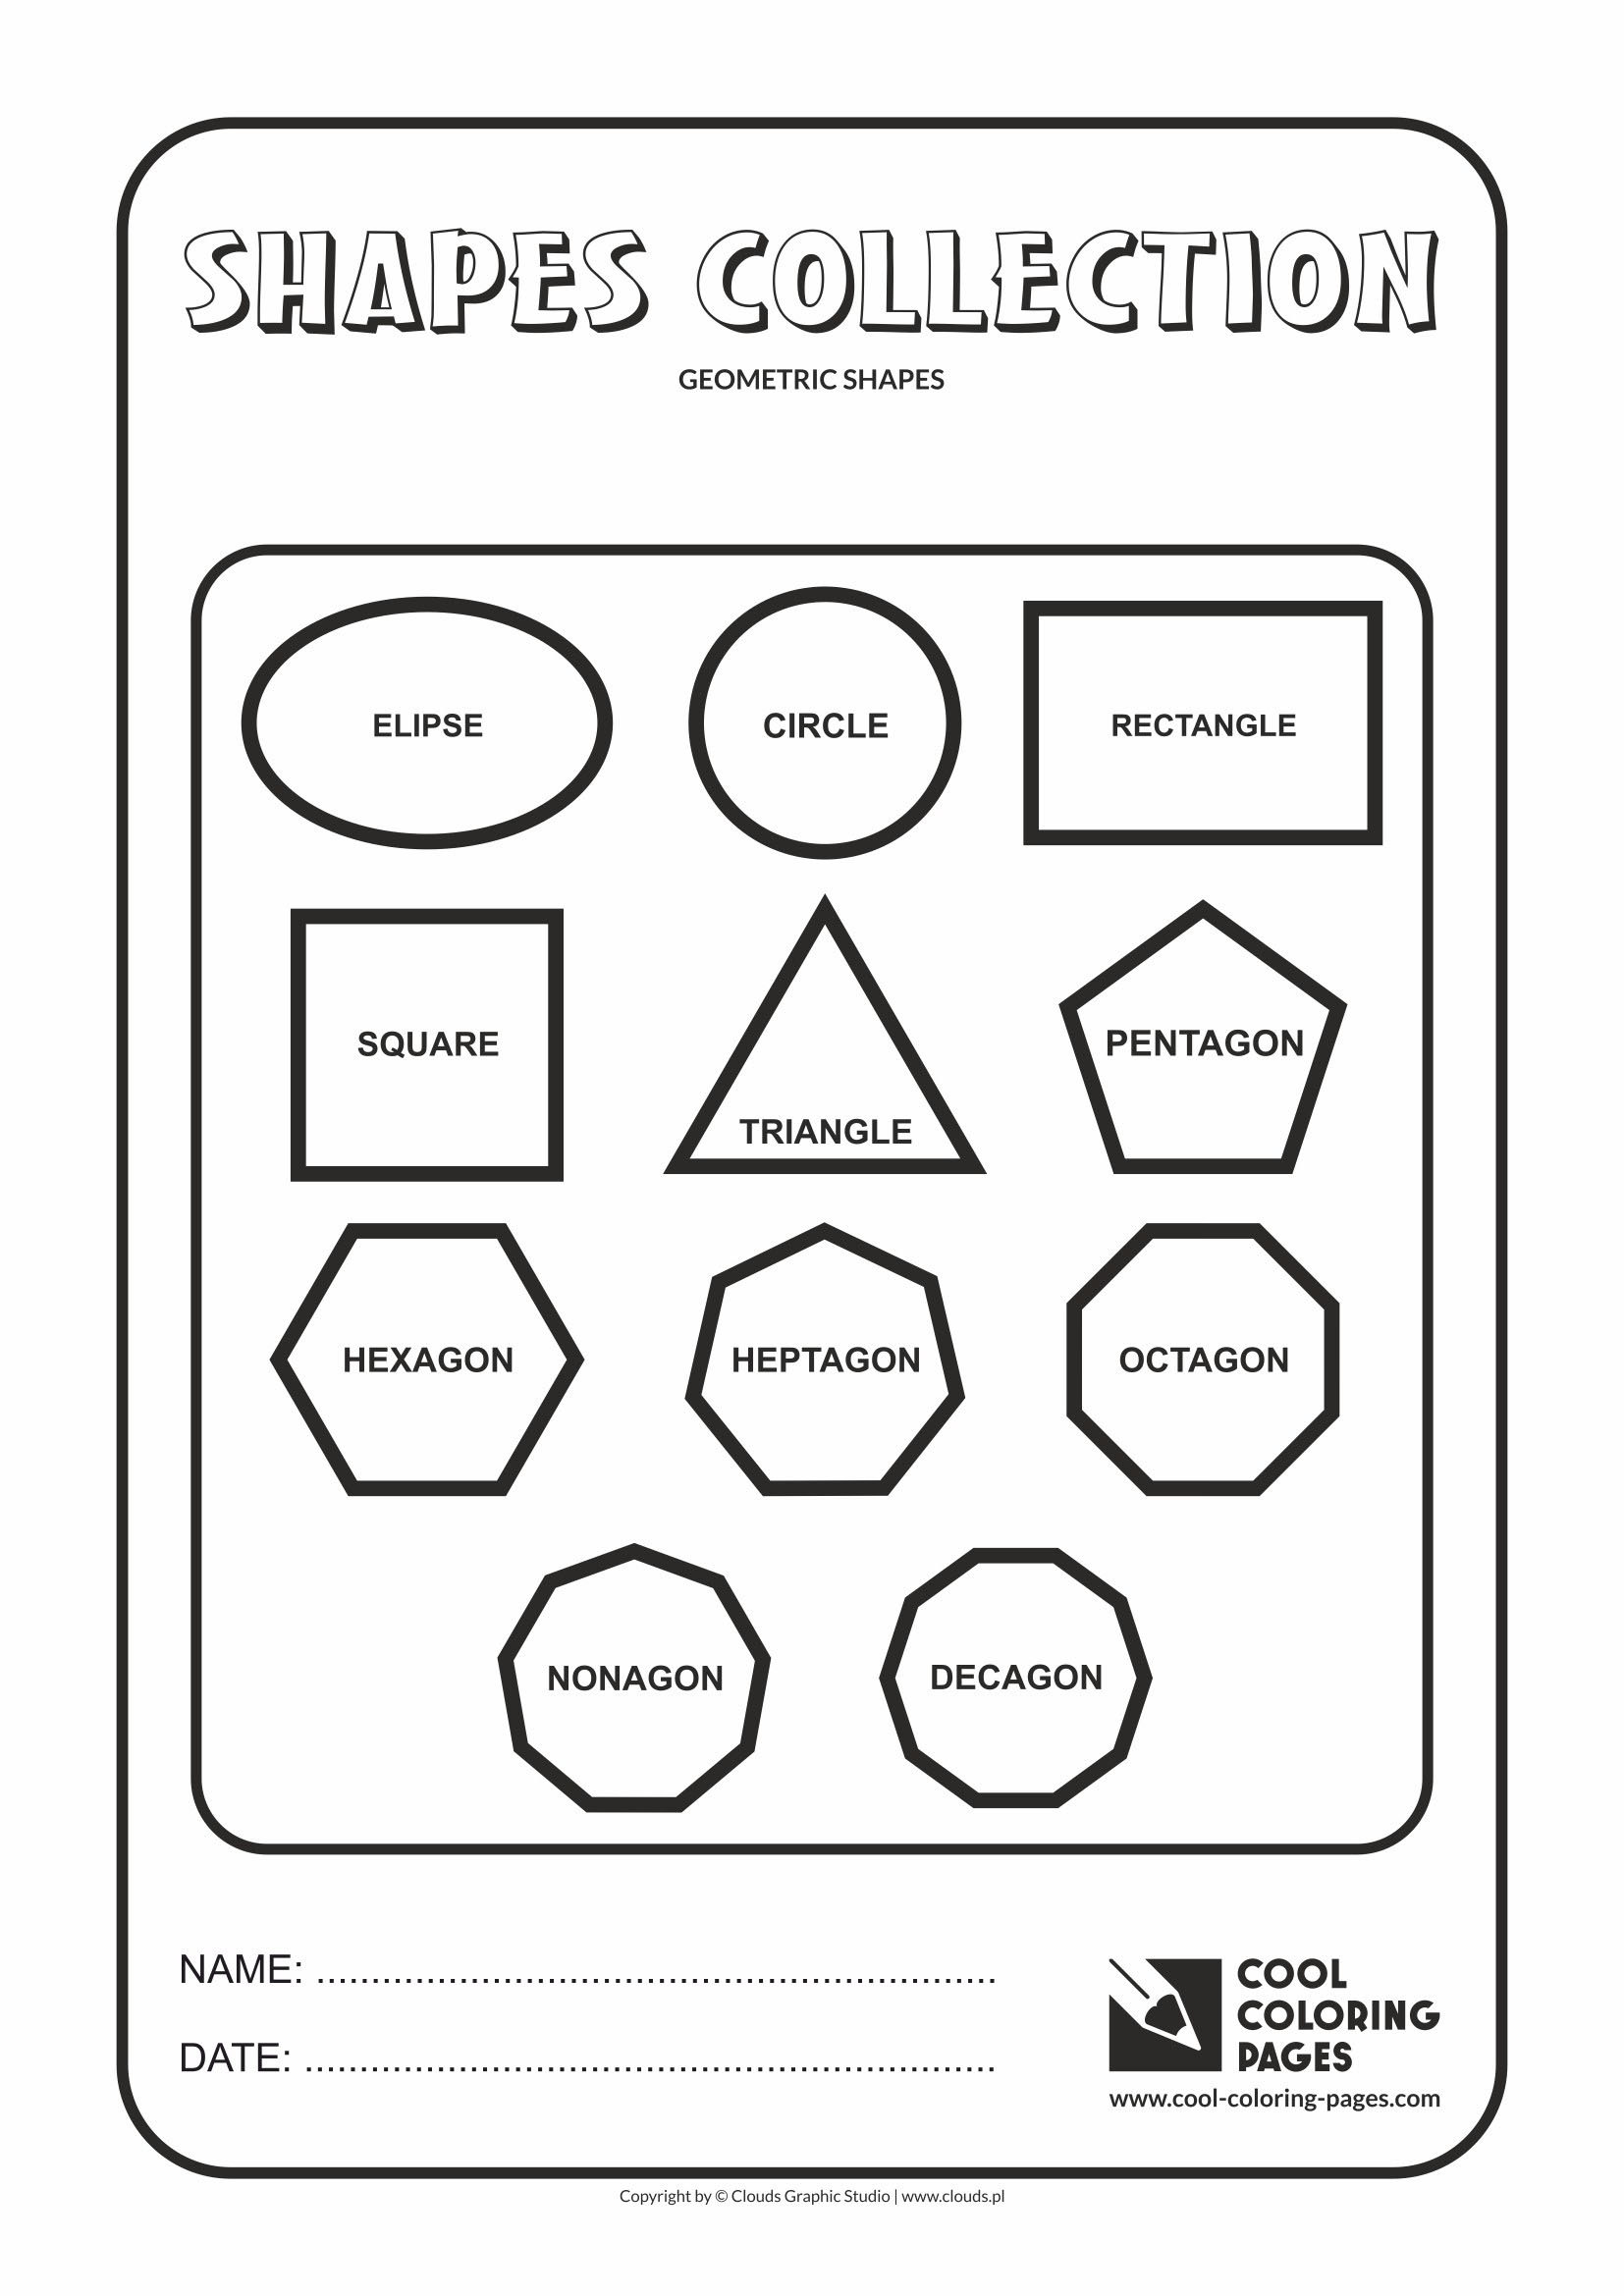 Cool Coloring Pages Geometric Shapes Cool Coloring Pages